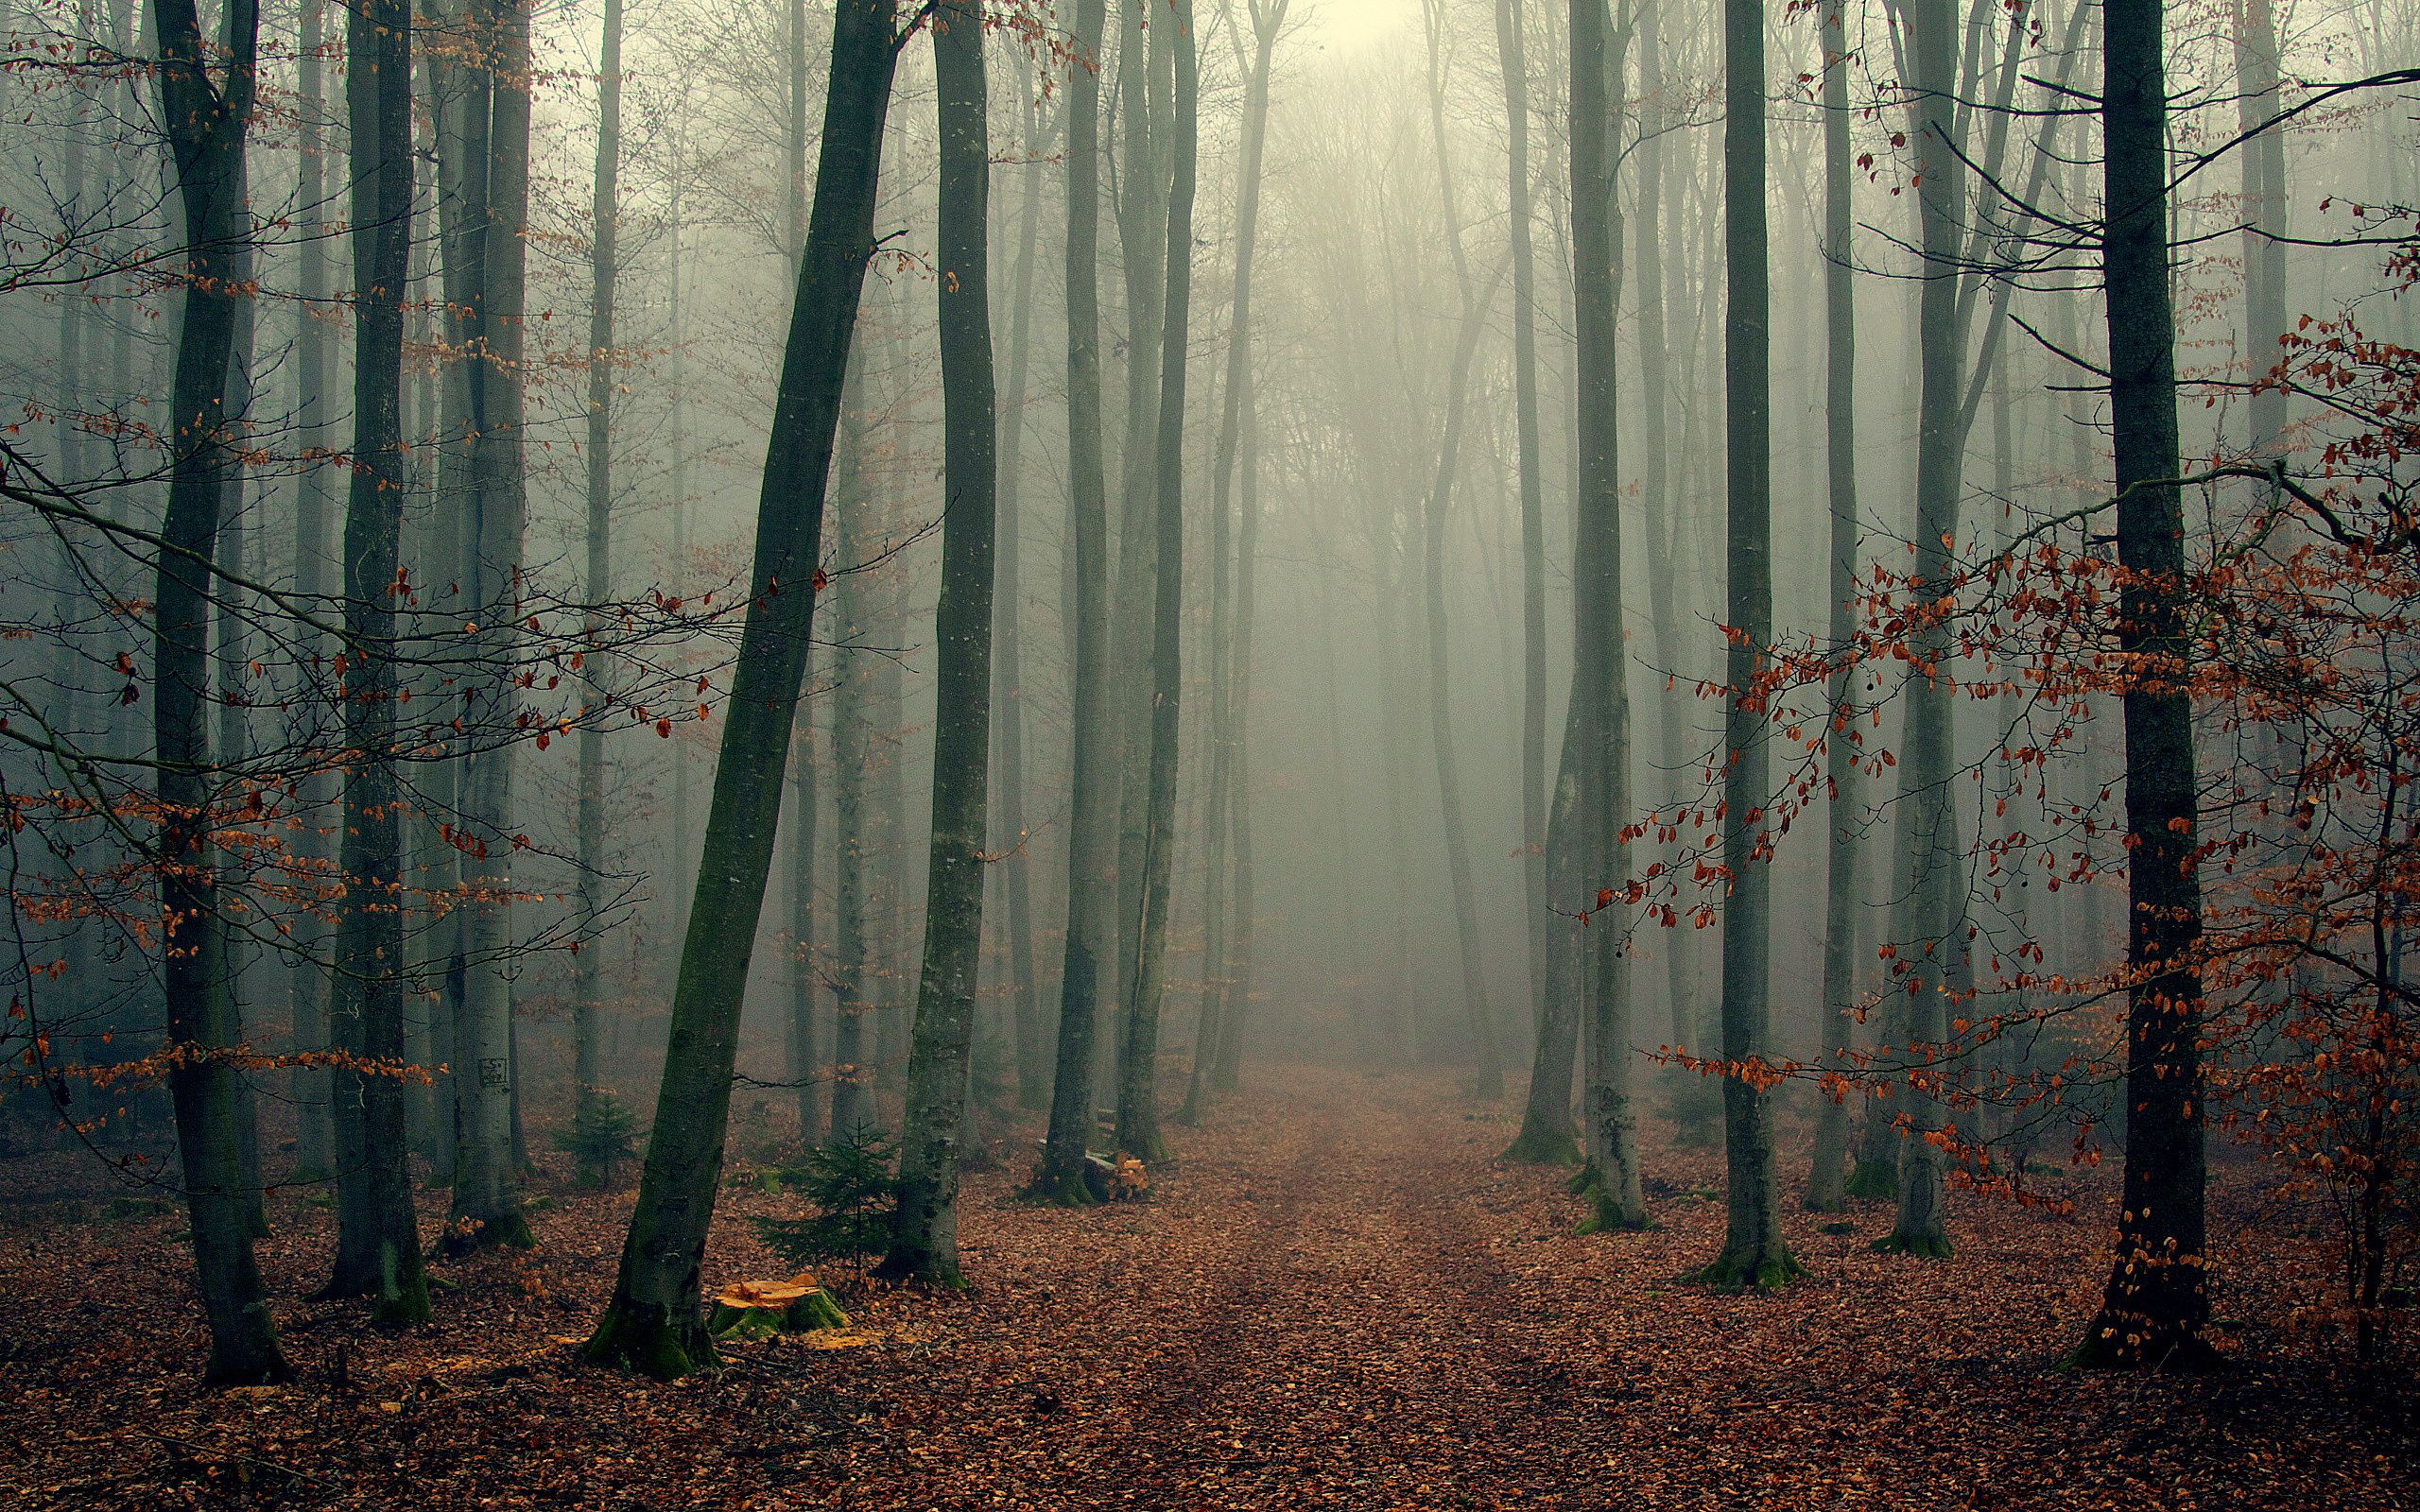 A path through the woods with trees on either side - Foggy forest